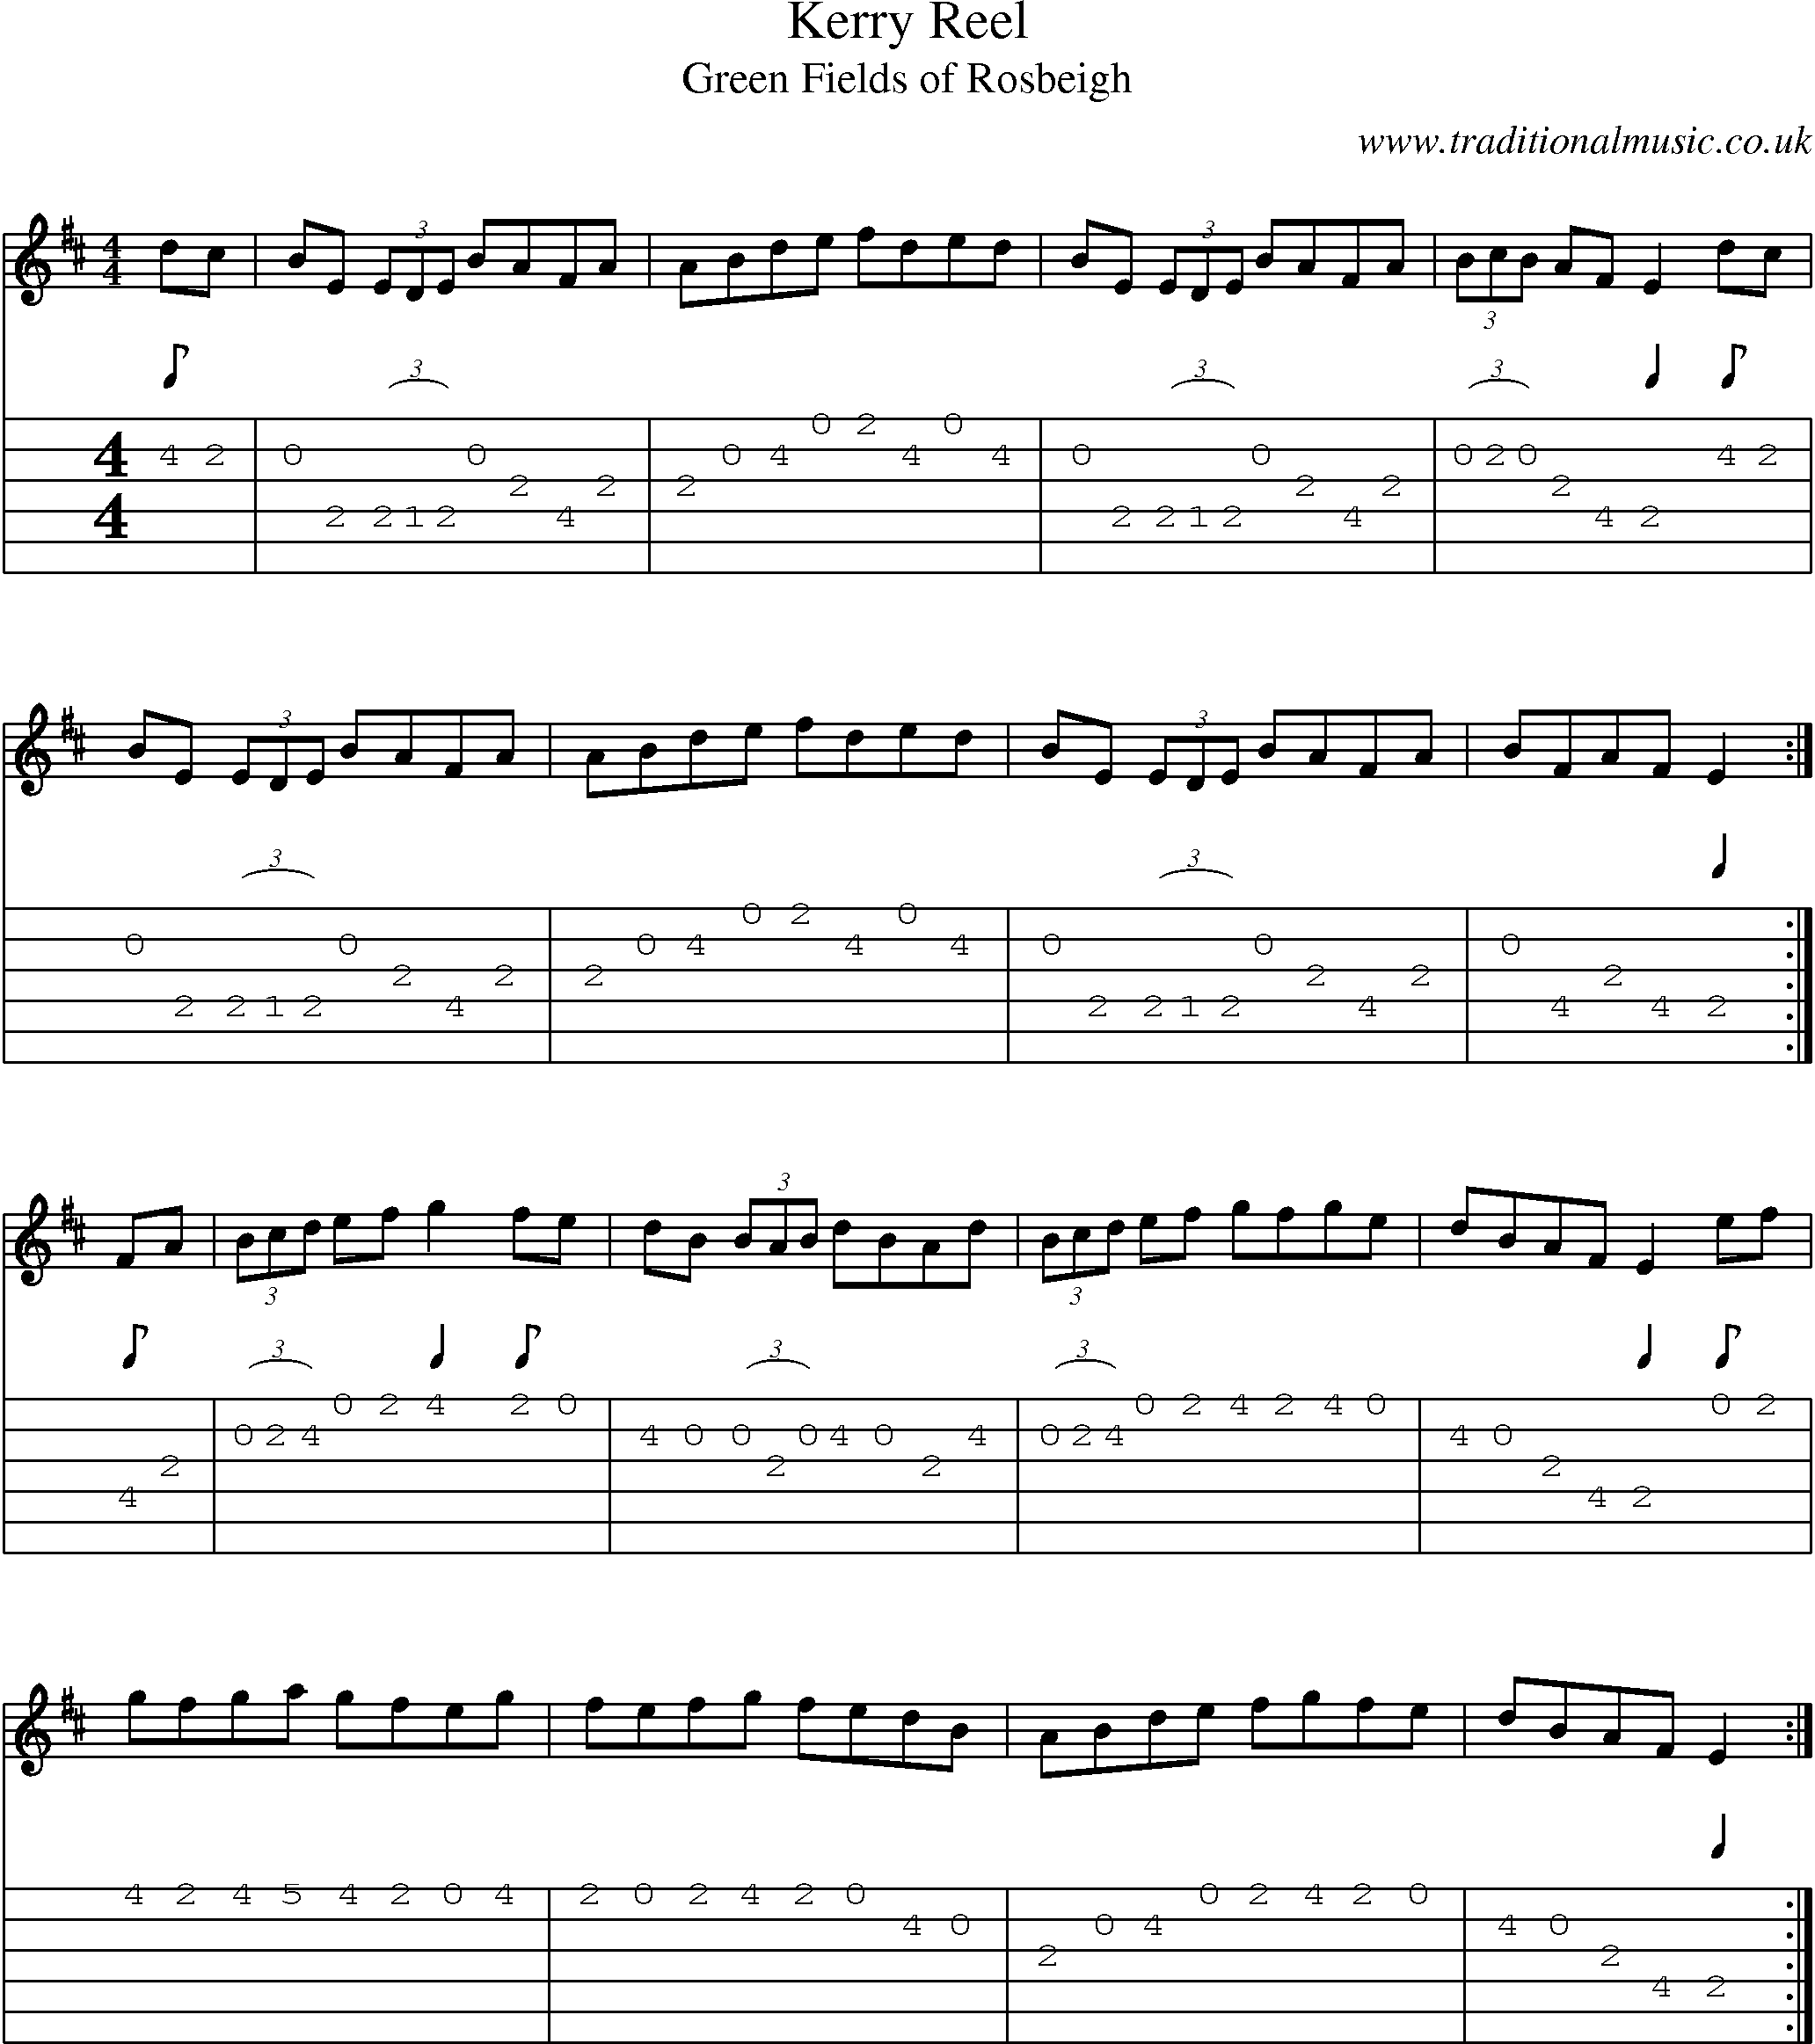 Music Score and Guitar Tabs for Kerry Reel